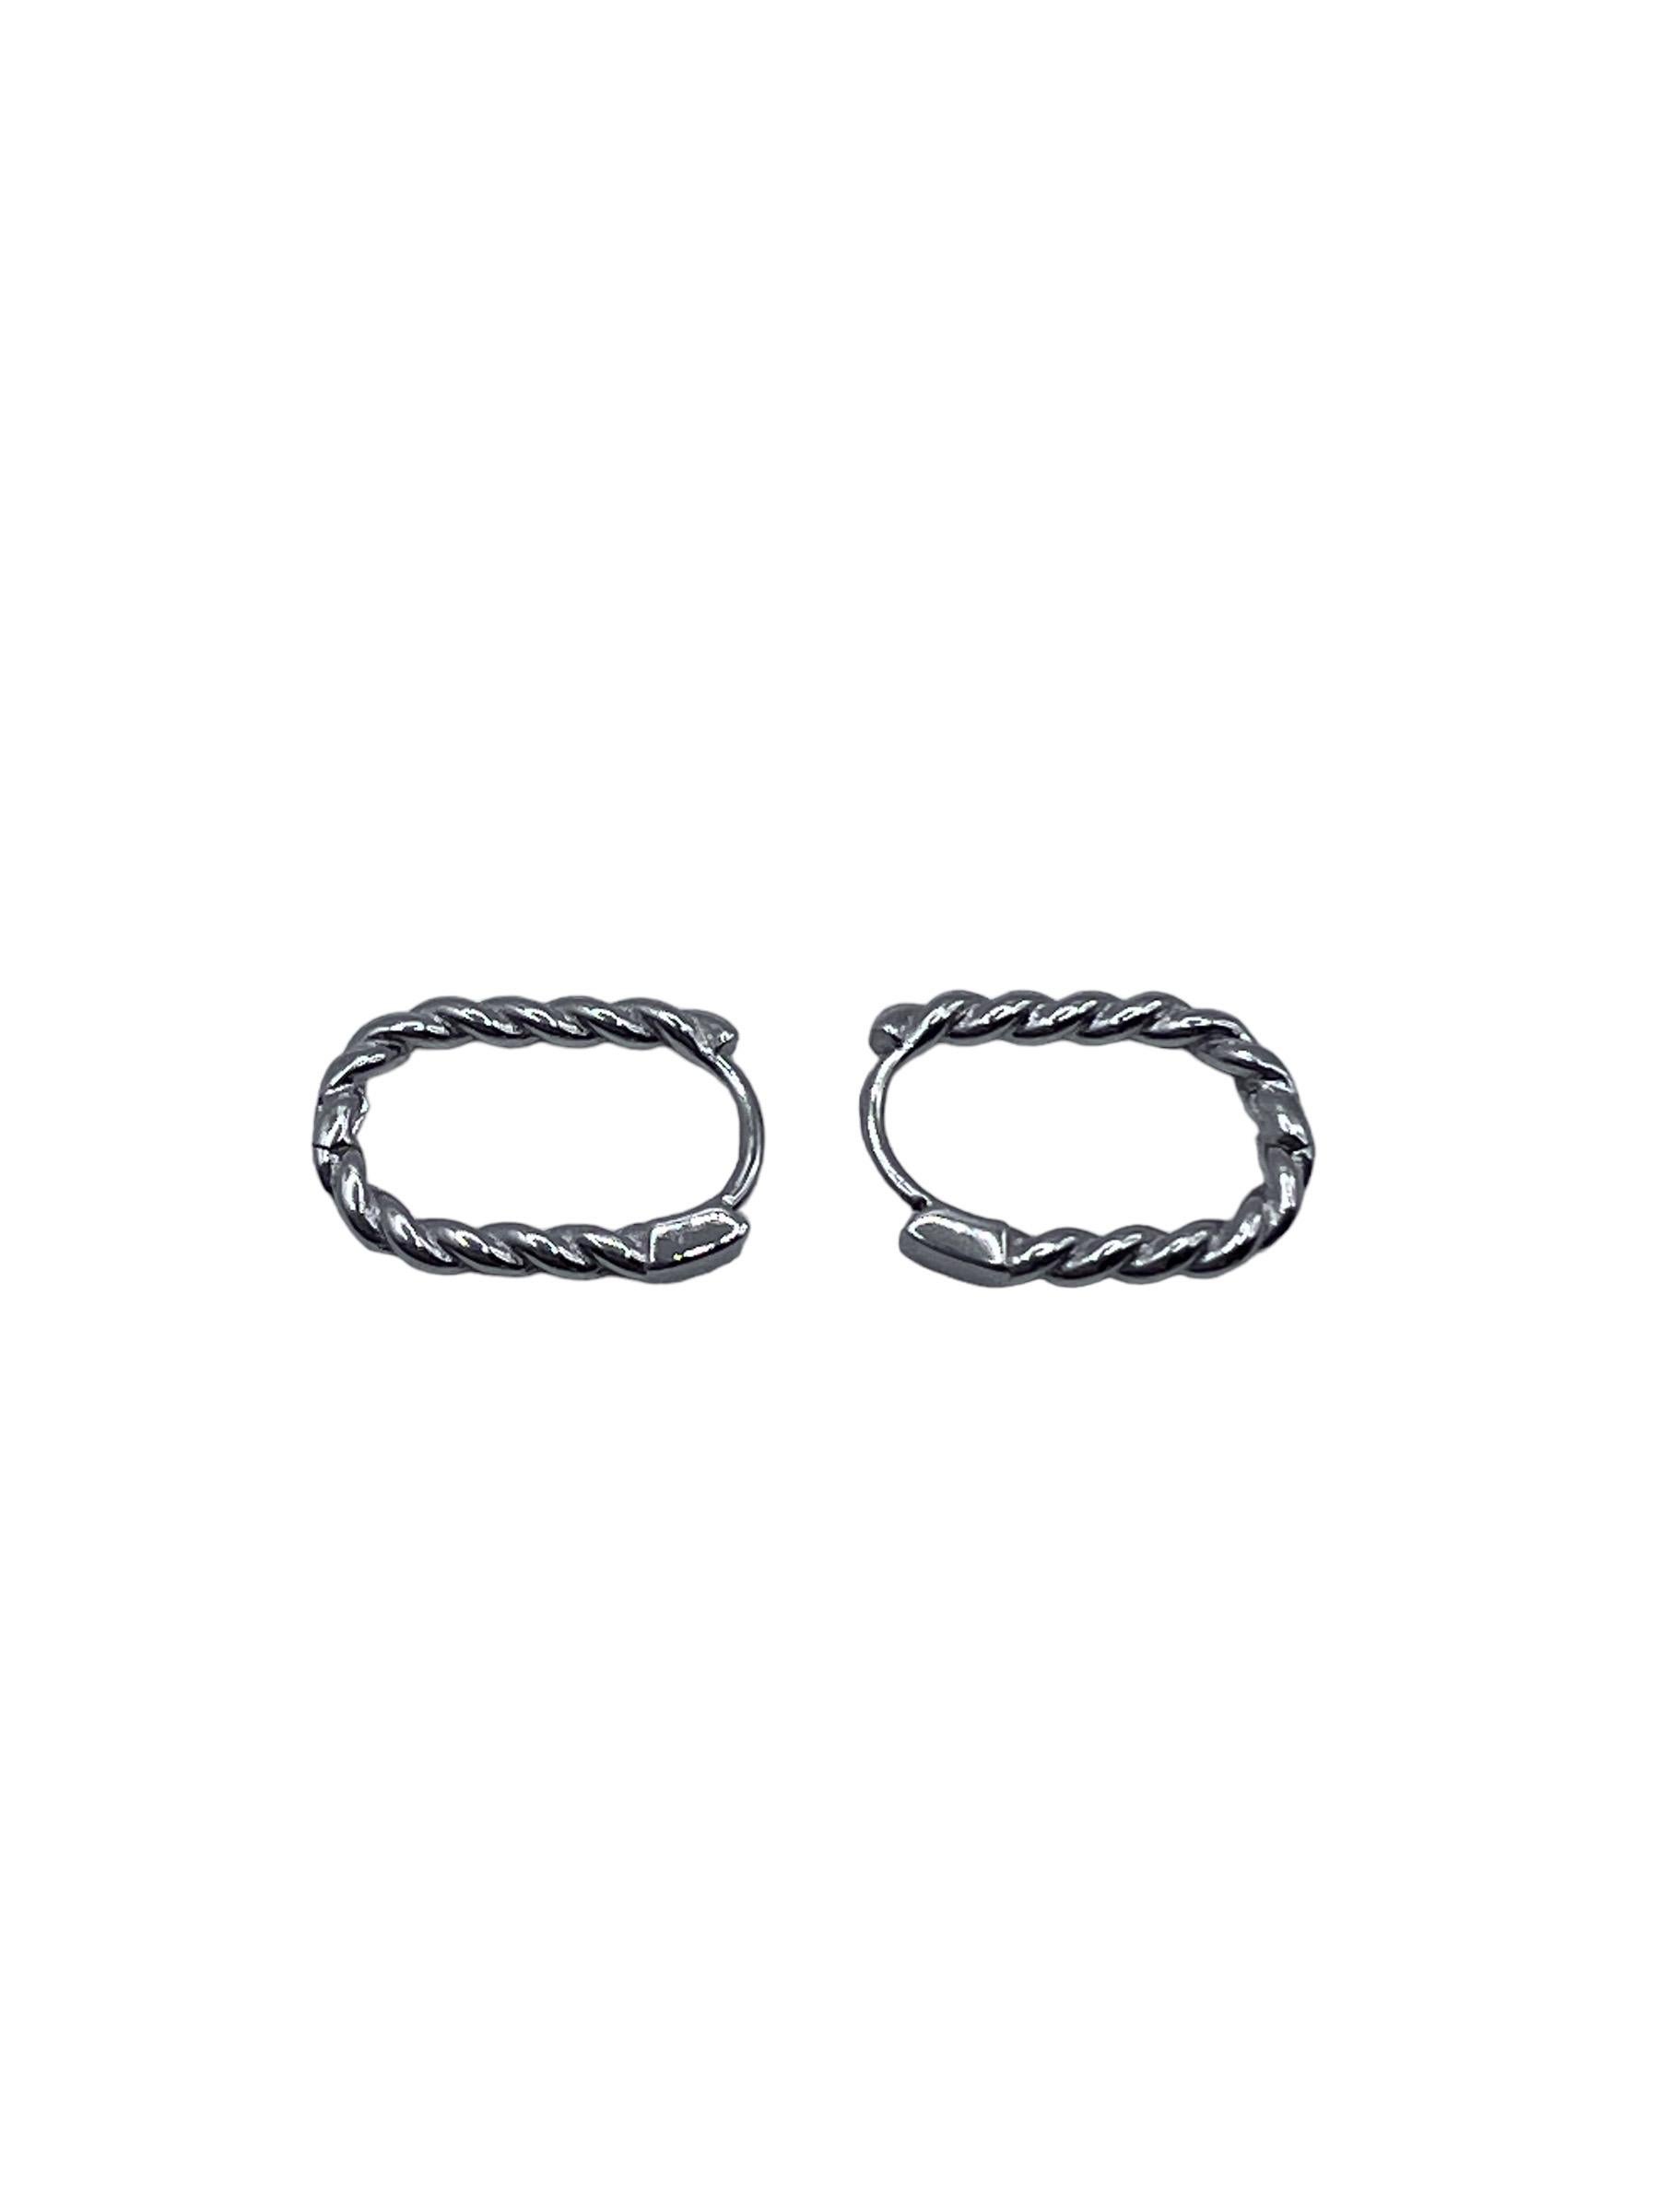 These small hoop earrings boast a unique oval shape and intricate twist pattern, providing a stylish and eye-catching addition to any outfit. Perfect for everyday wear and for that subtle and beautiful evening look. Earrings are hinged for an easy